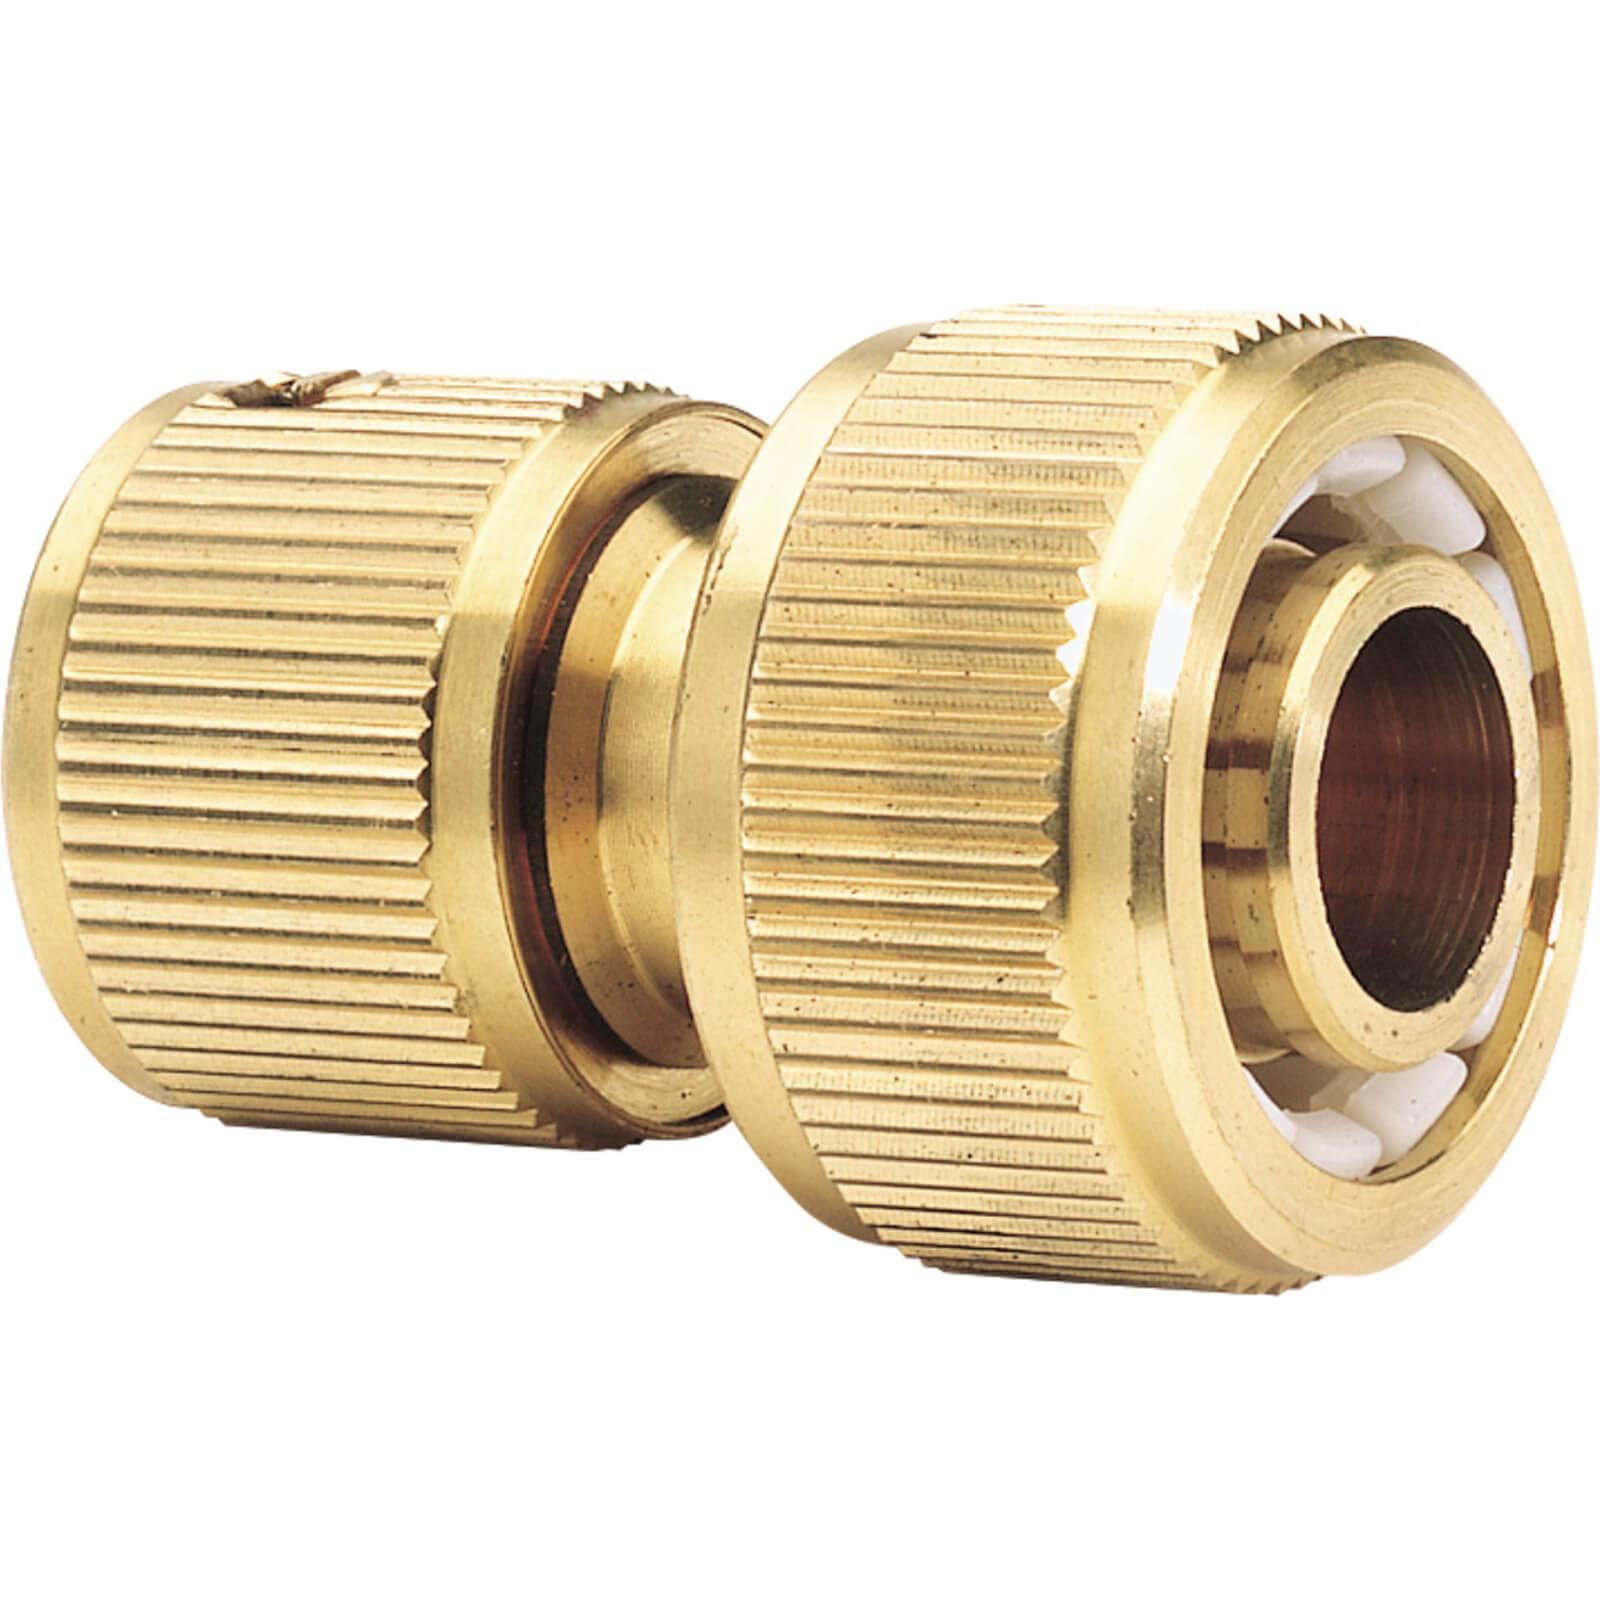 Image of Draper Expert Brass Garden Hose Pipe Connector 3/4" / 19mm Pack of 1